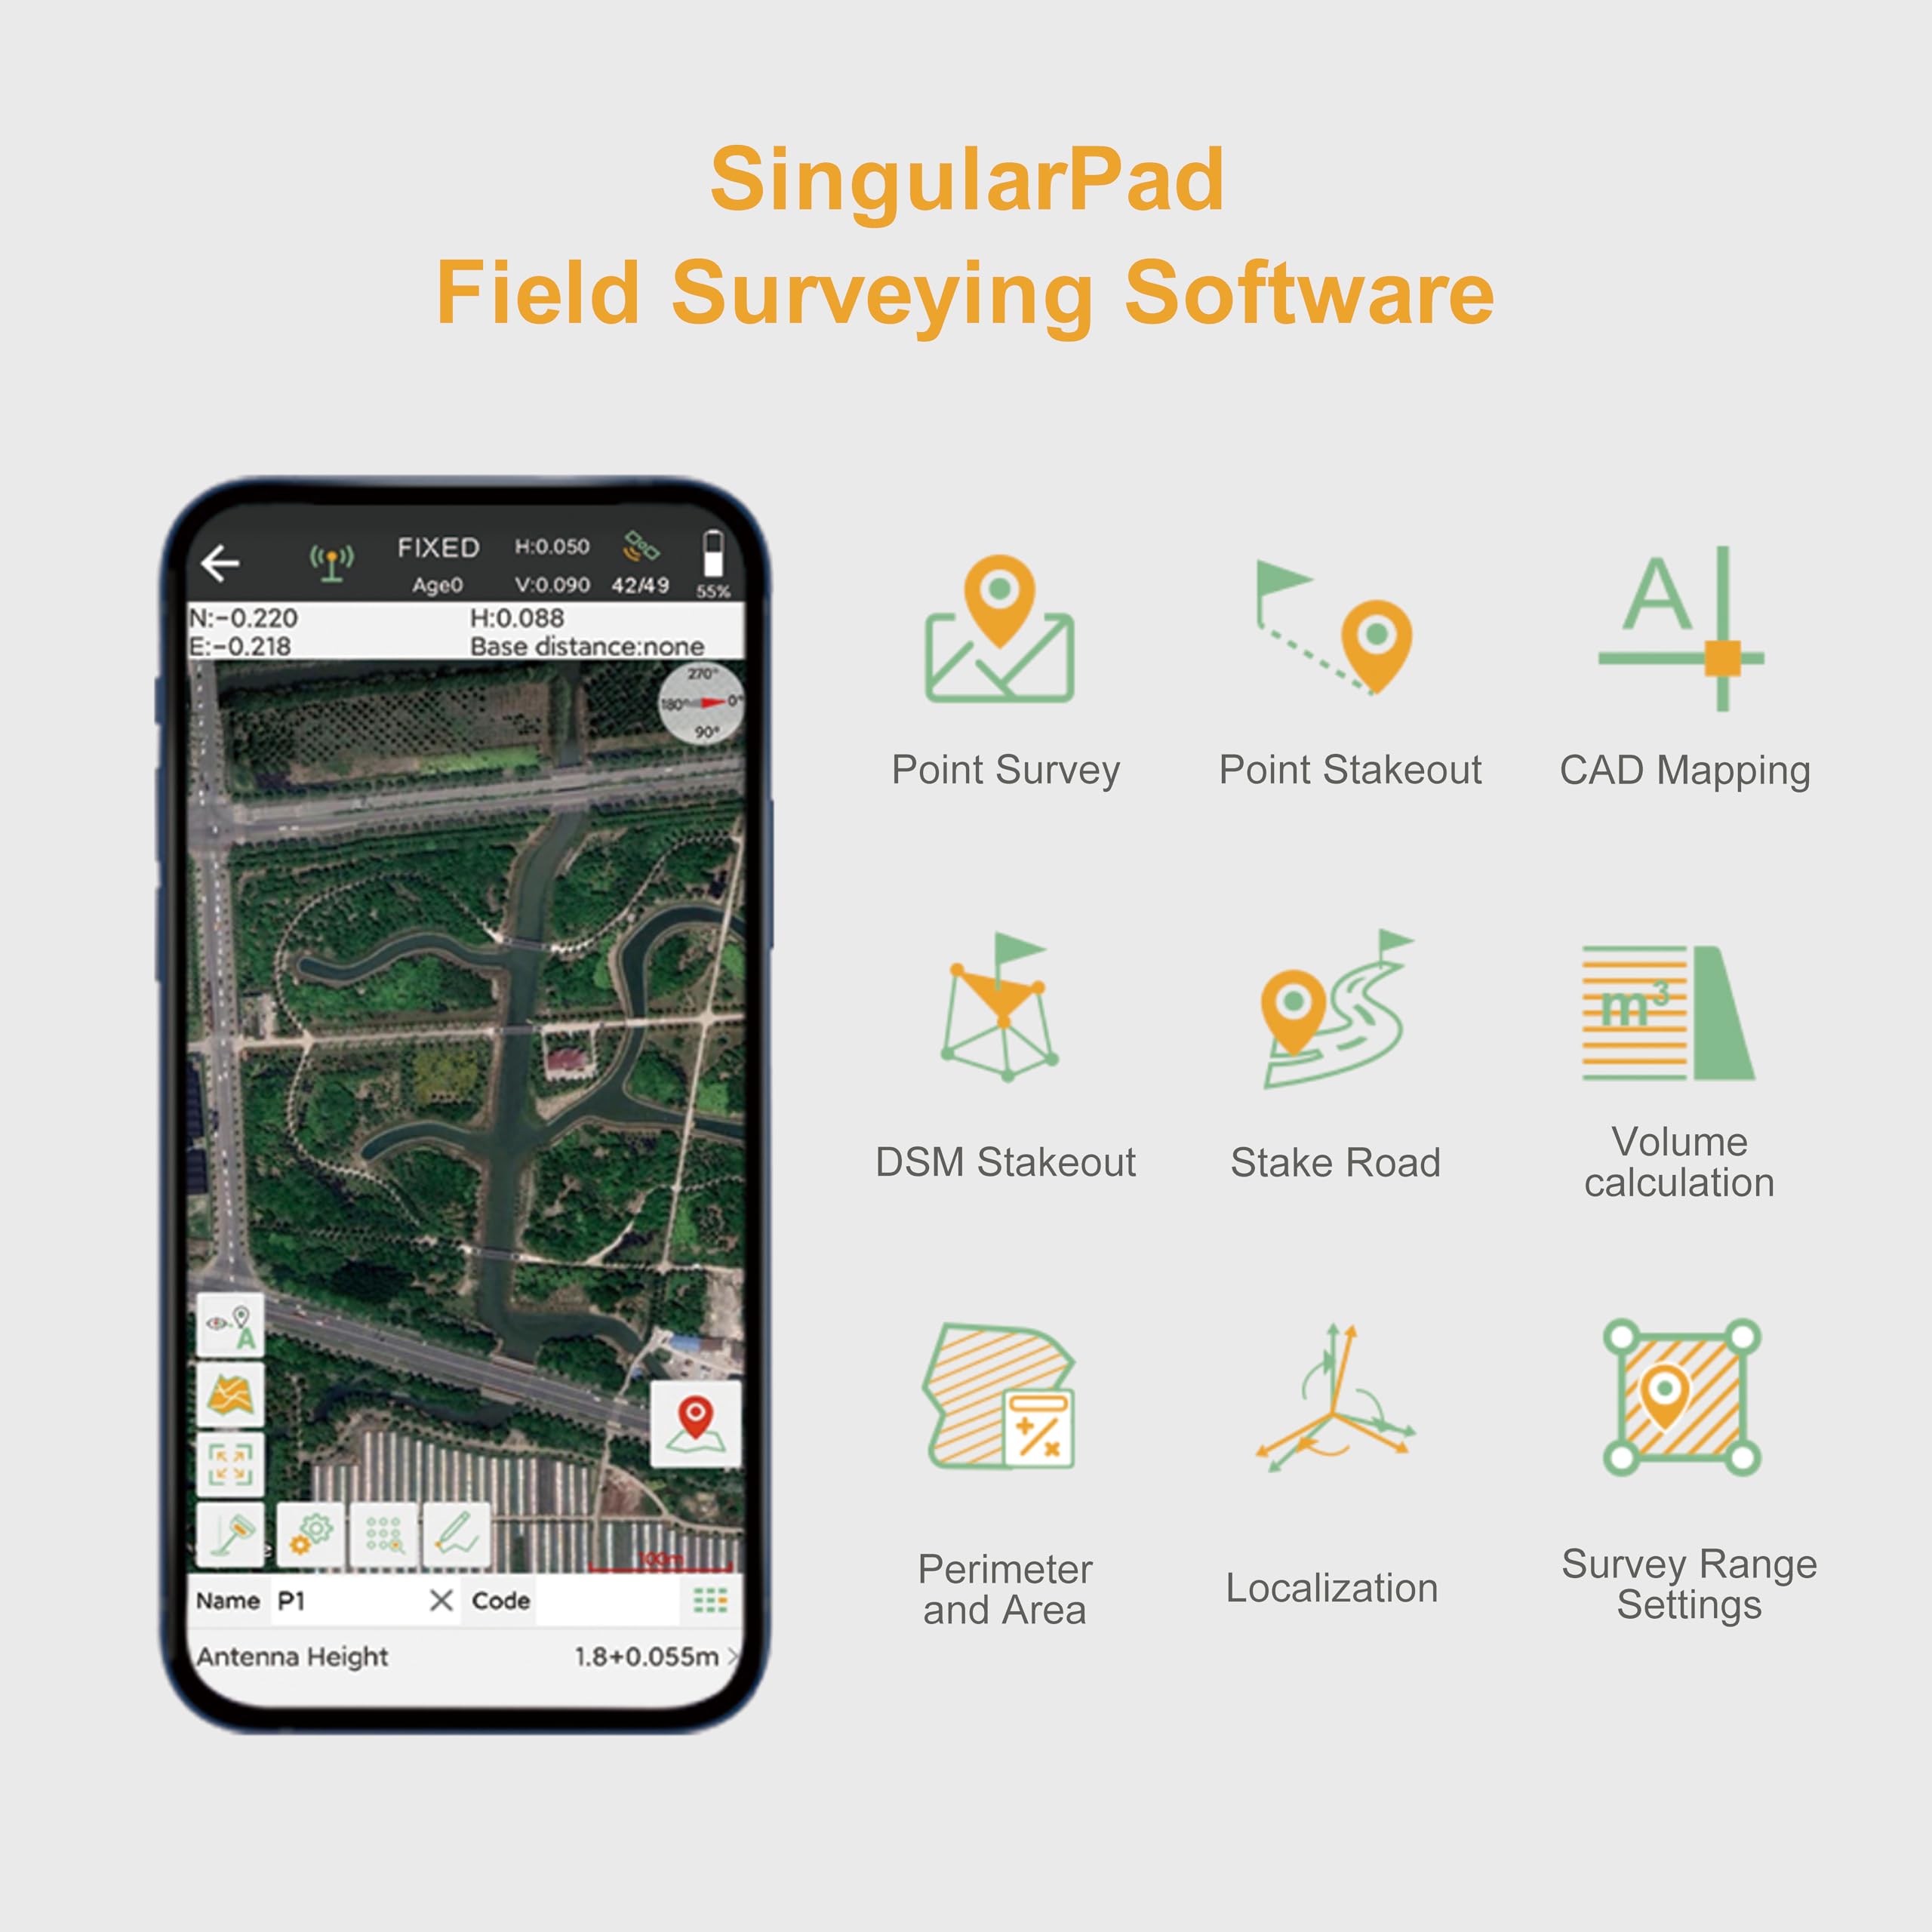 RTK GNSS Survey Equipment 60° Tilt Built-in IMU, Equipped with Rover Handheld GPS for Surveying and Survey Software. Ideal for Land Surveying, GIS, Mine Surveying, and Topographic Survey Applications